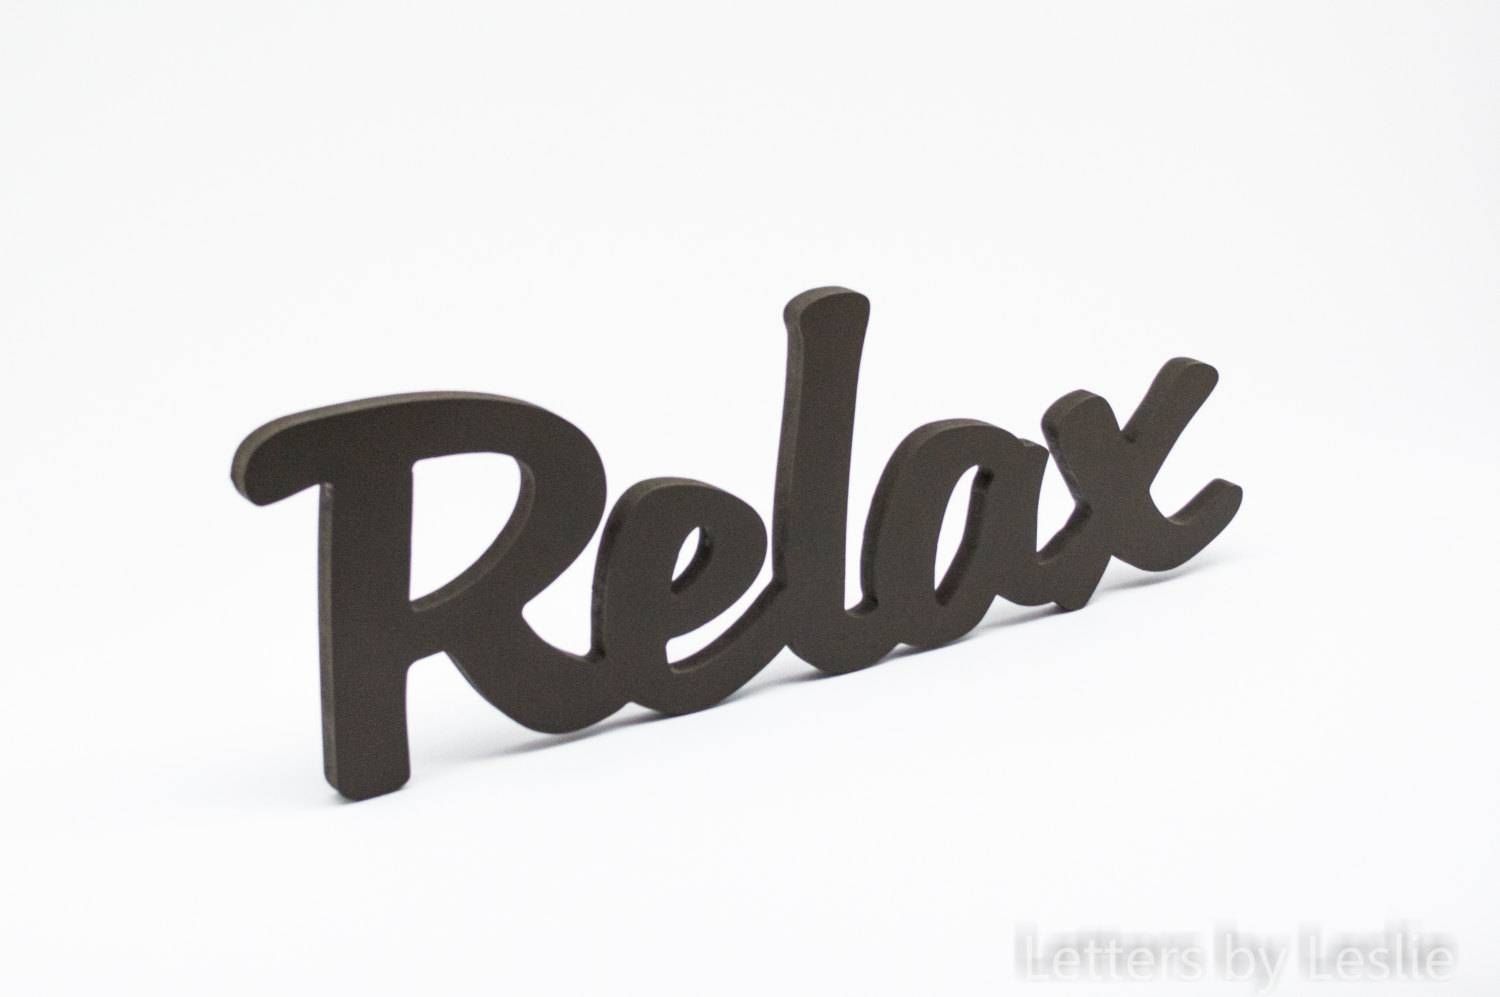 Wall Art Wooden Words | Wallartideas Inside Most Up To Date Wooden Word Wall Art (View 30 of 30)